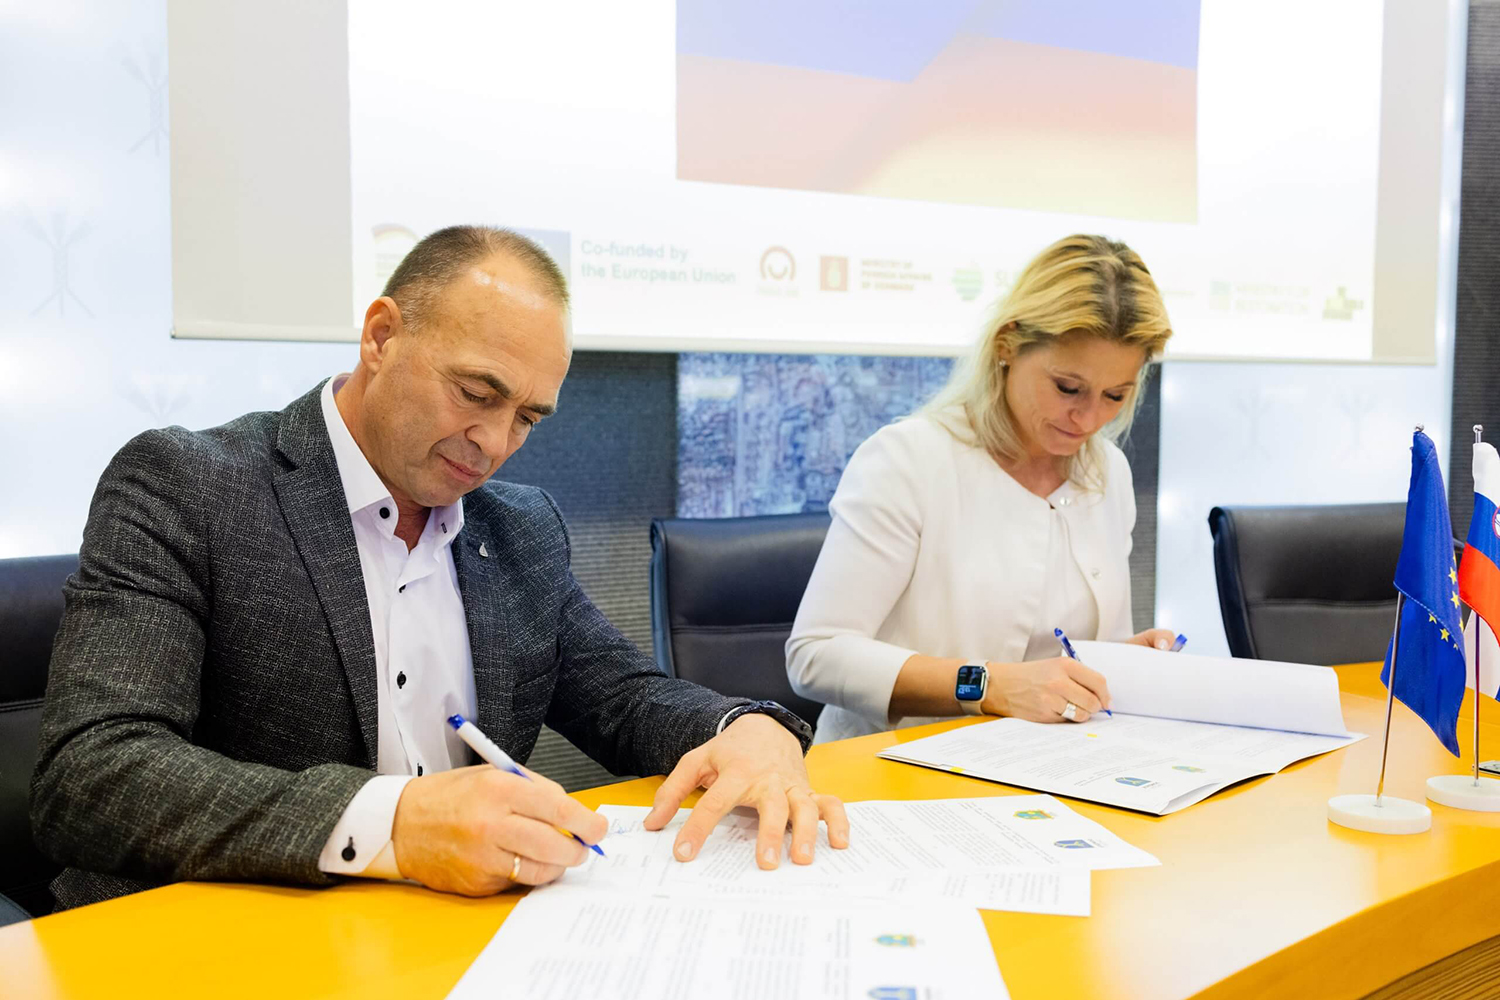 U-LEAD helped the municipality in the Vinnytsia Oblast to find partners in Slovenia